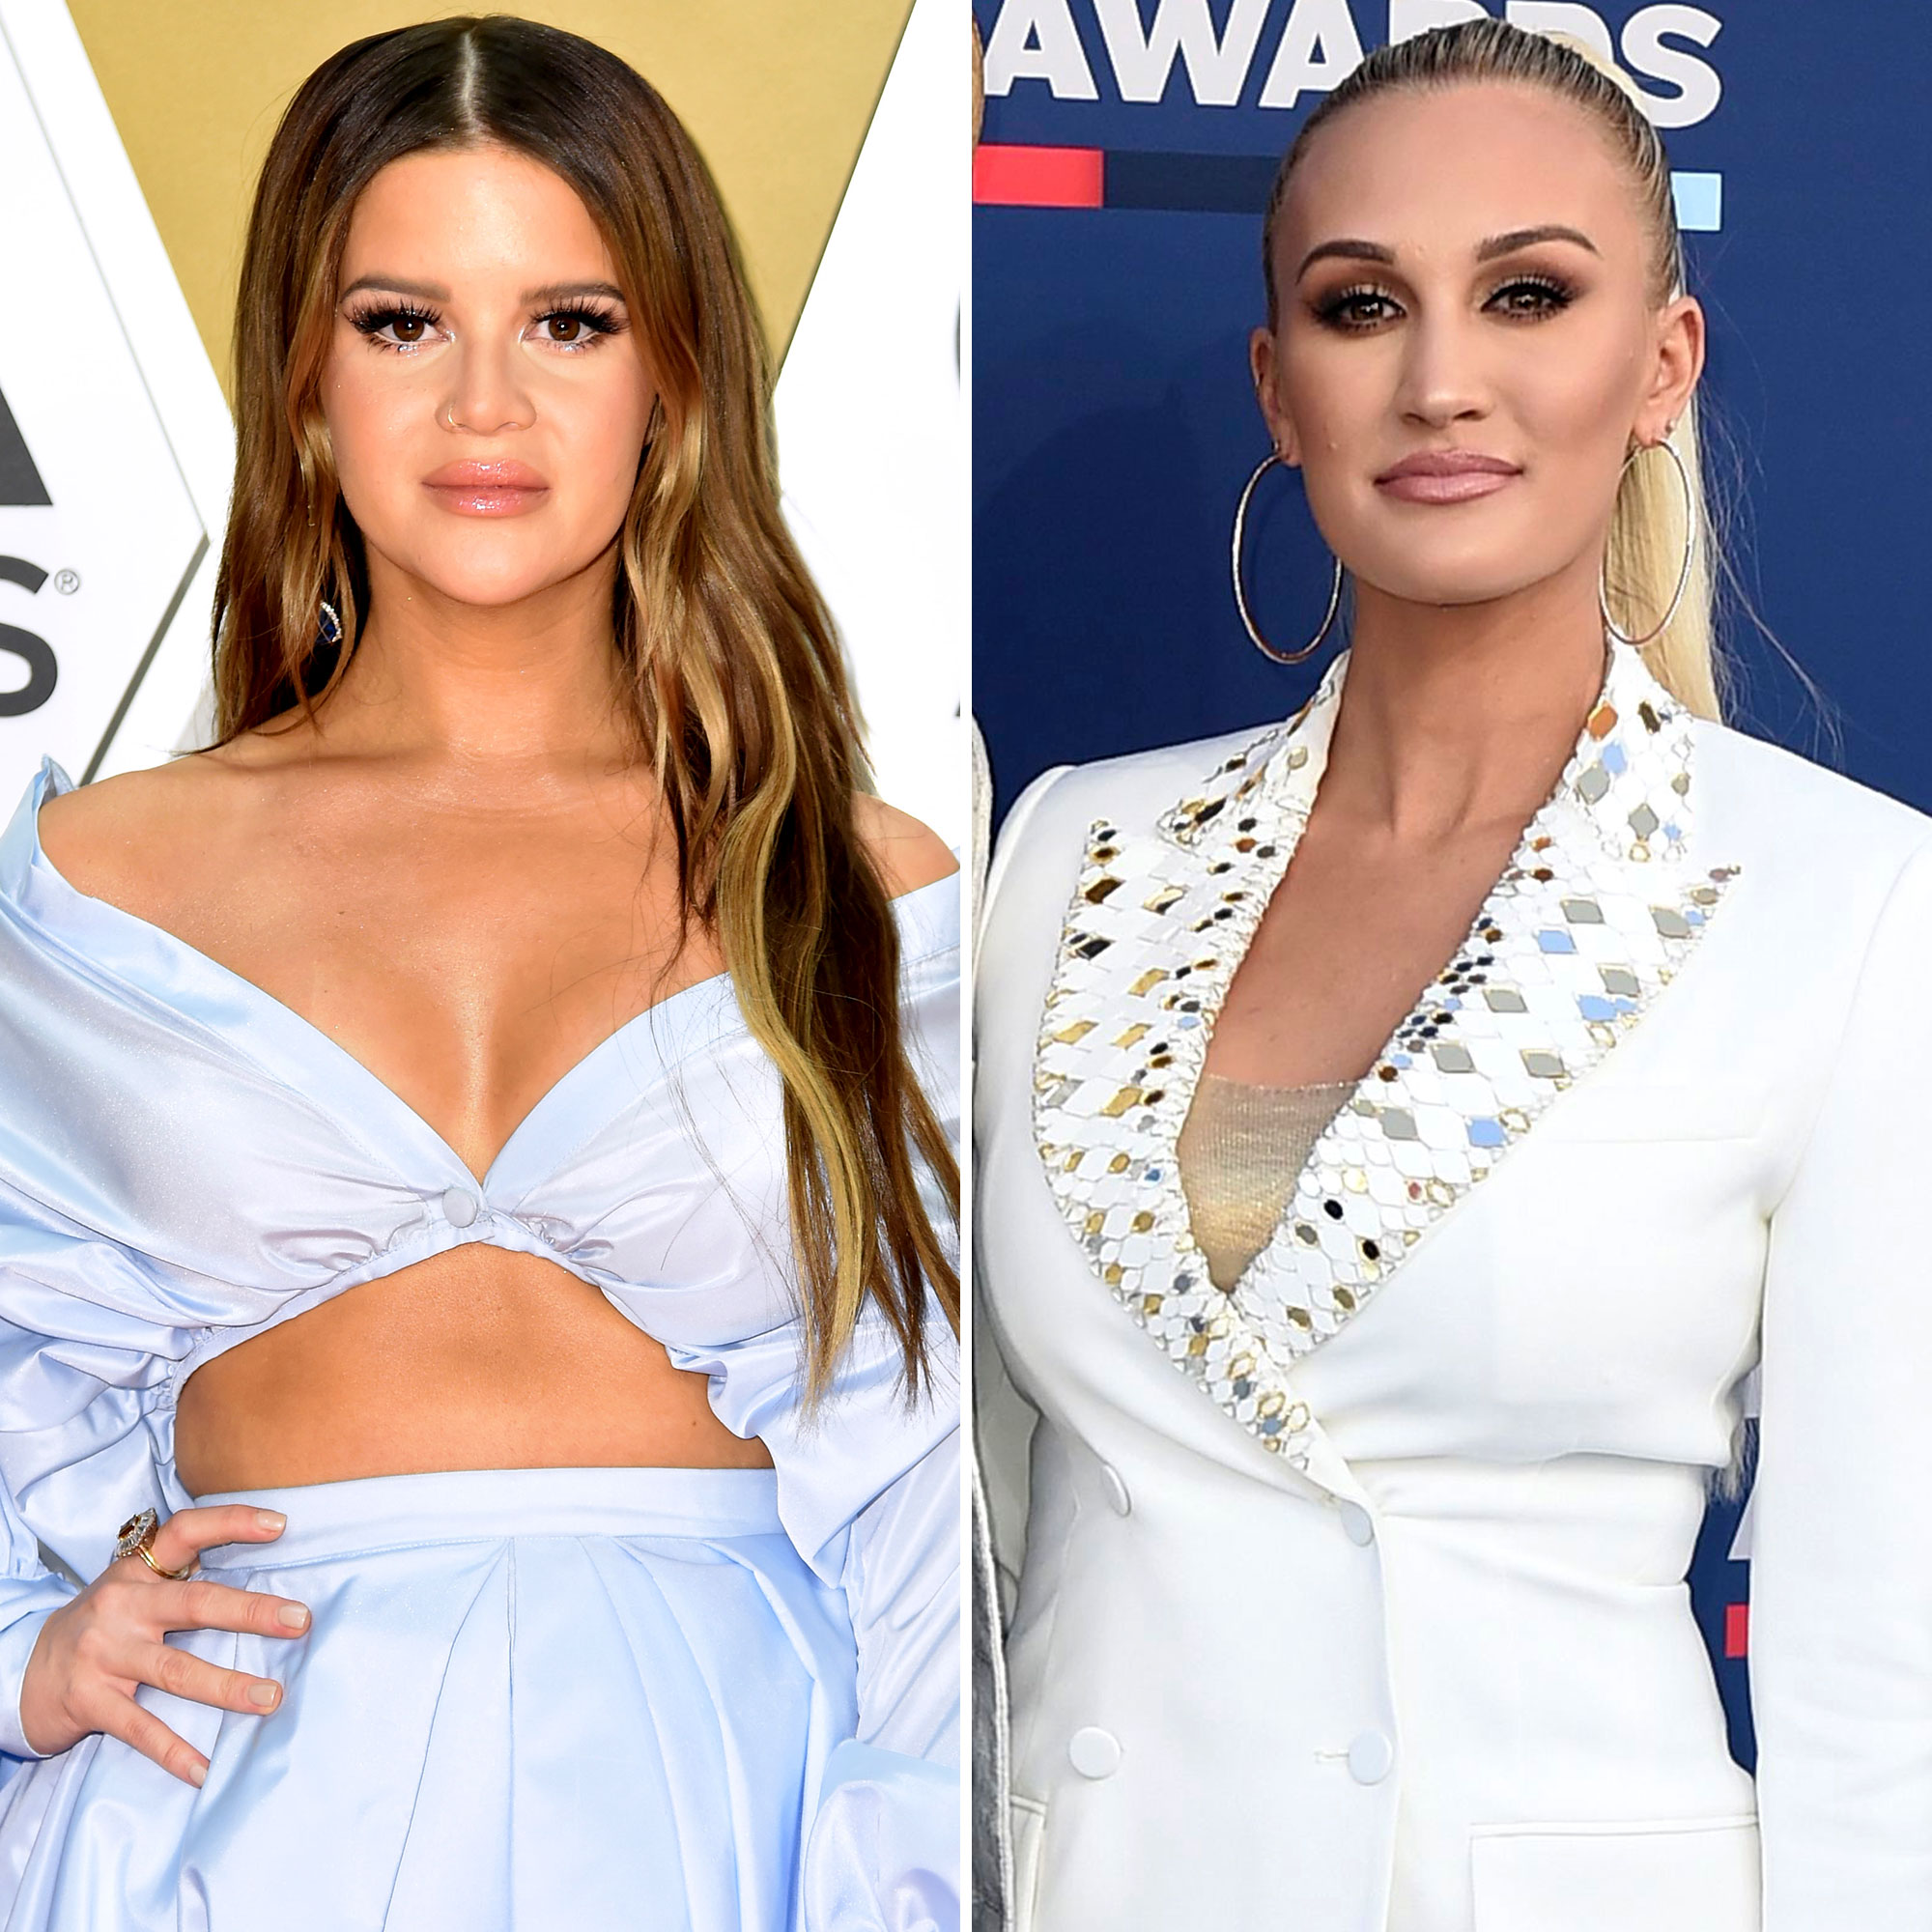 Maren Morris and Brittany Aldeans Feud Celebrities Take Sides